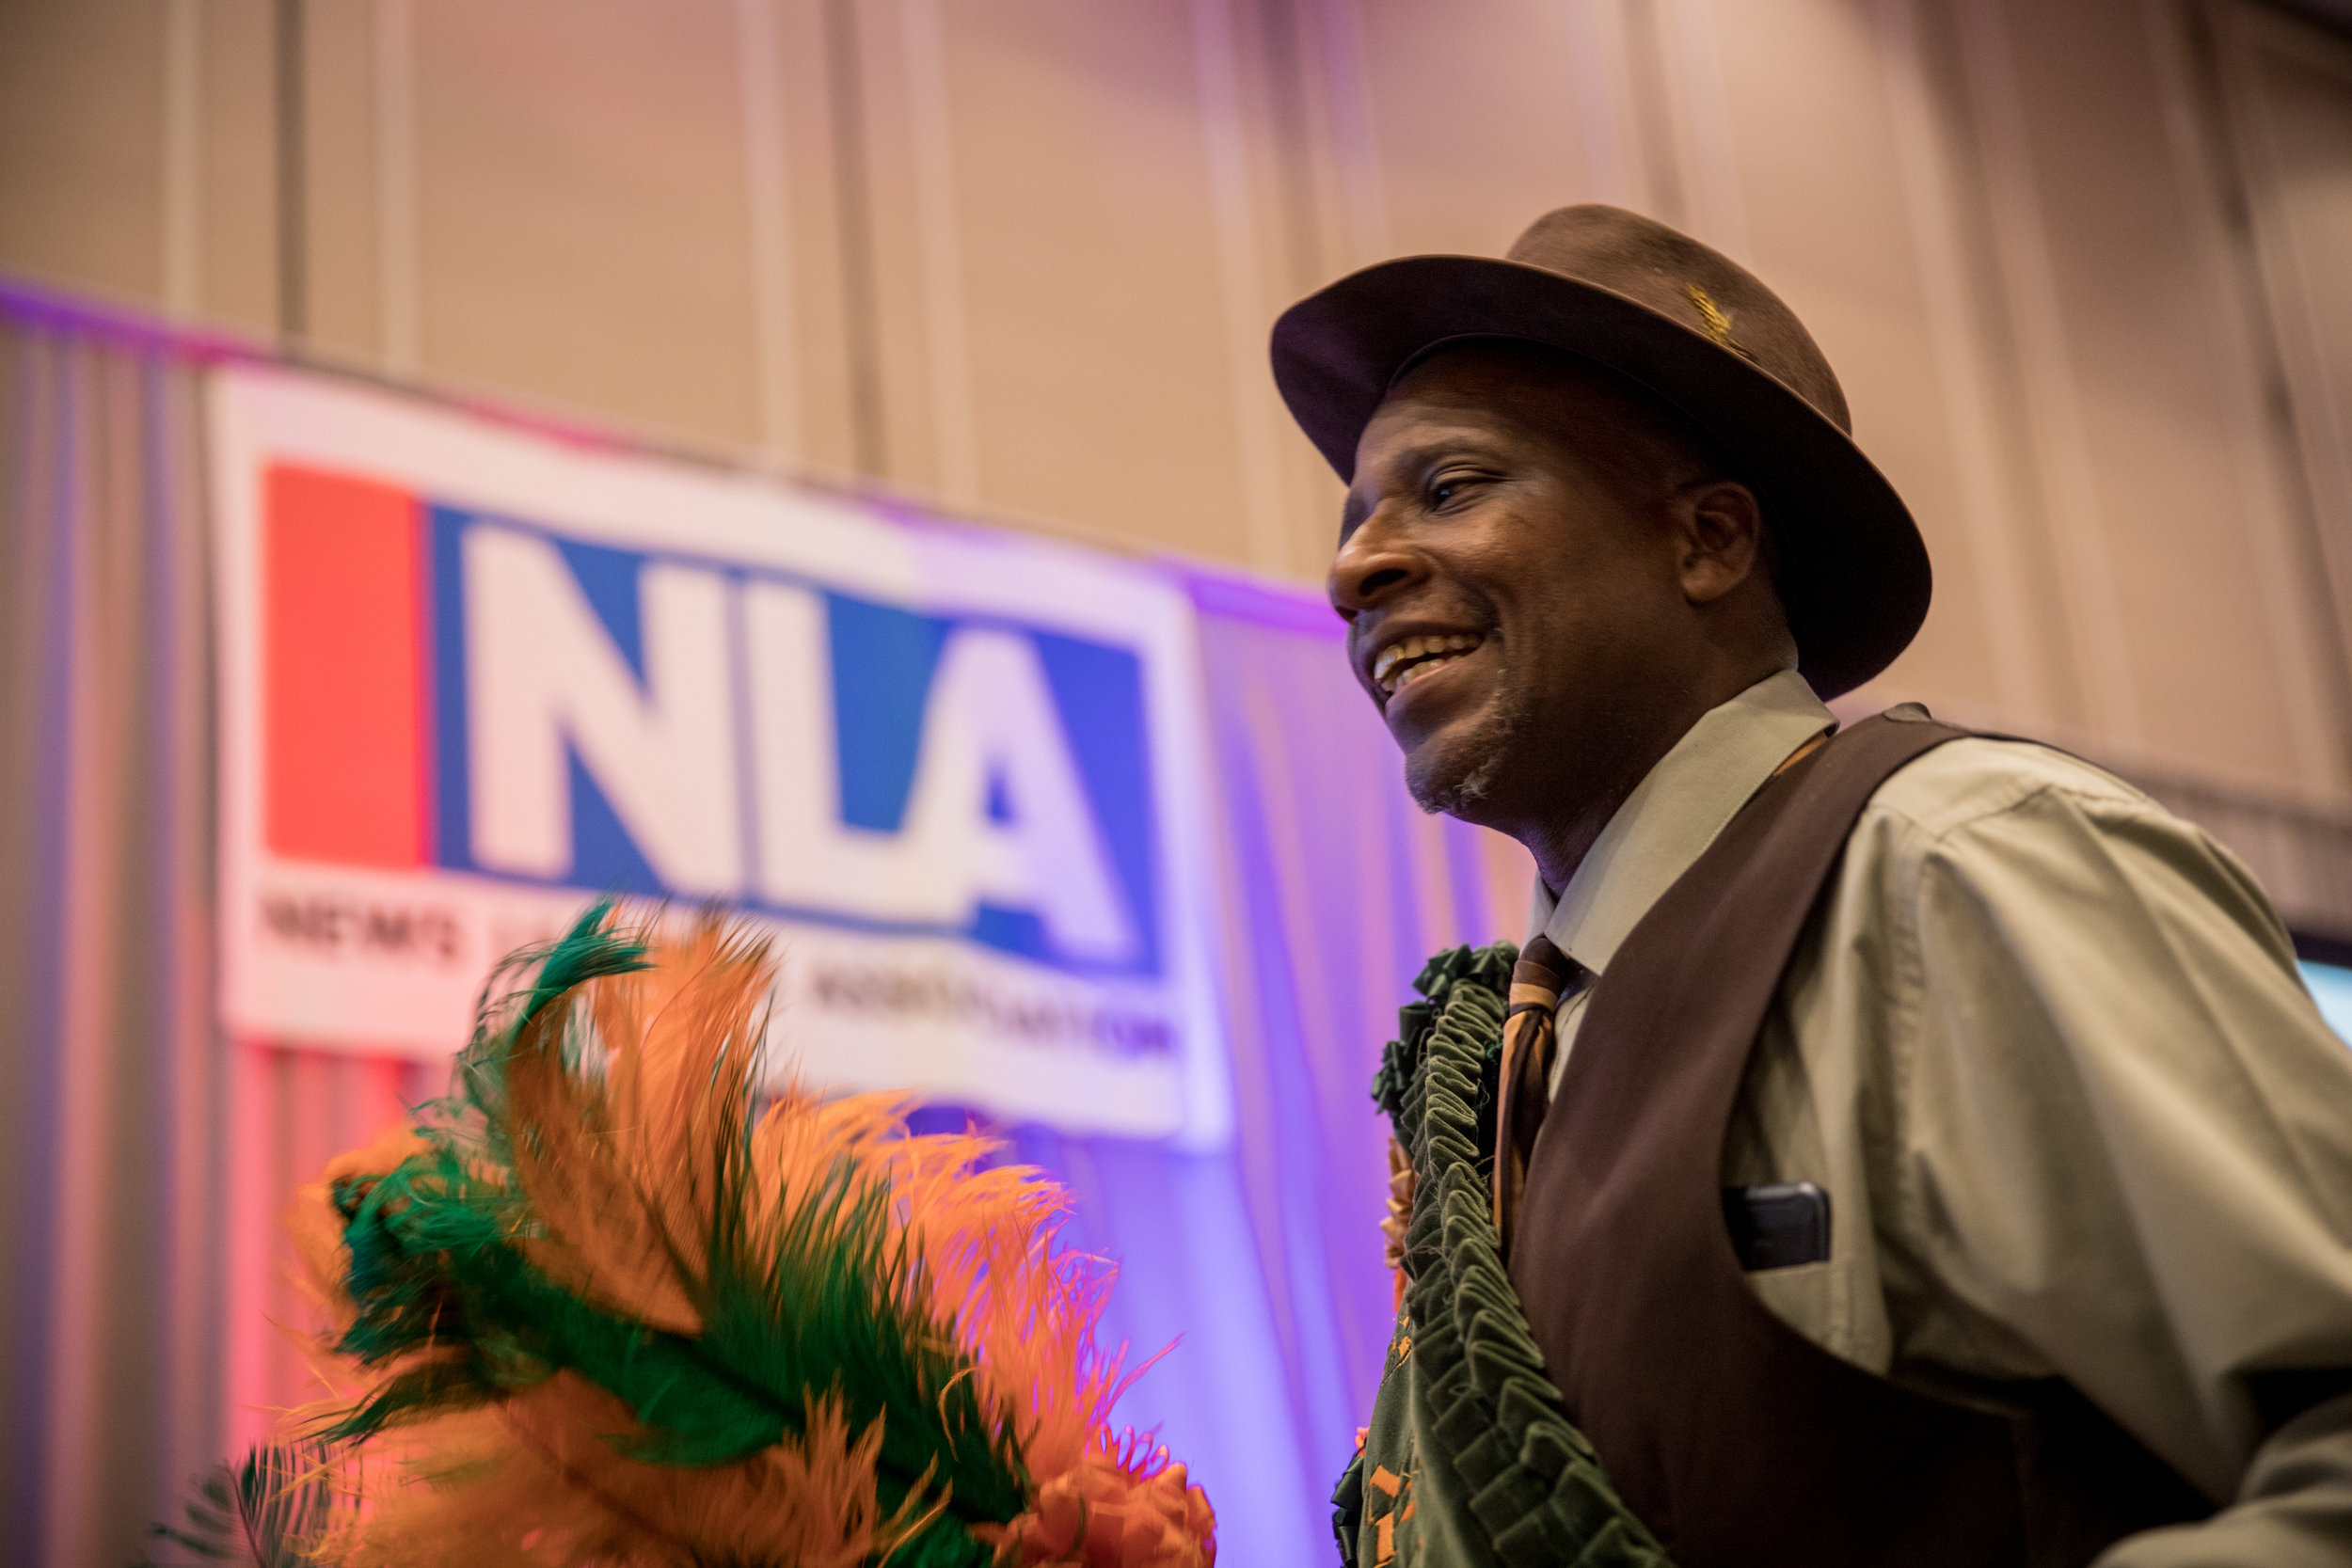  As the 2019 conference started Monday, a classic New Orleans jazz band welcomed the conference goers.  Photo Courtesy: Eric Pritchett  